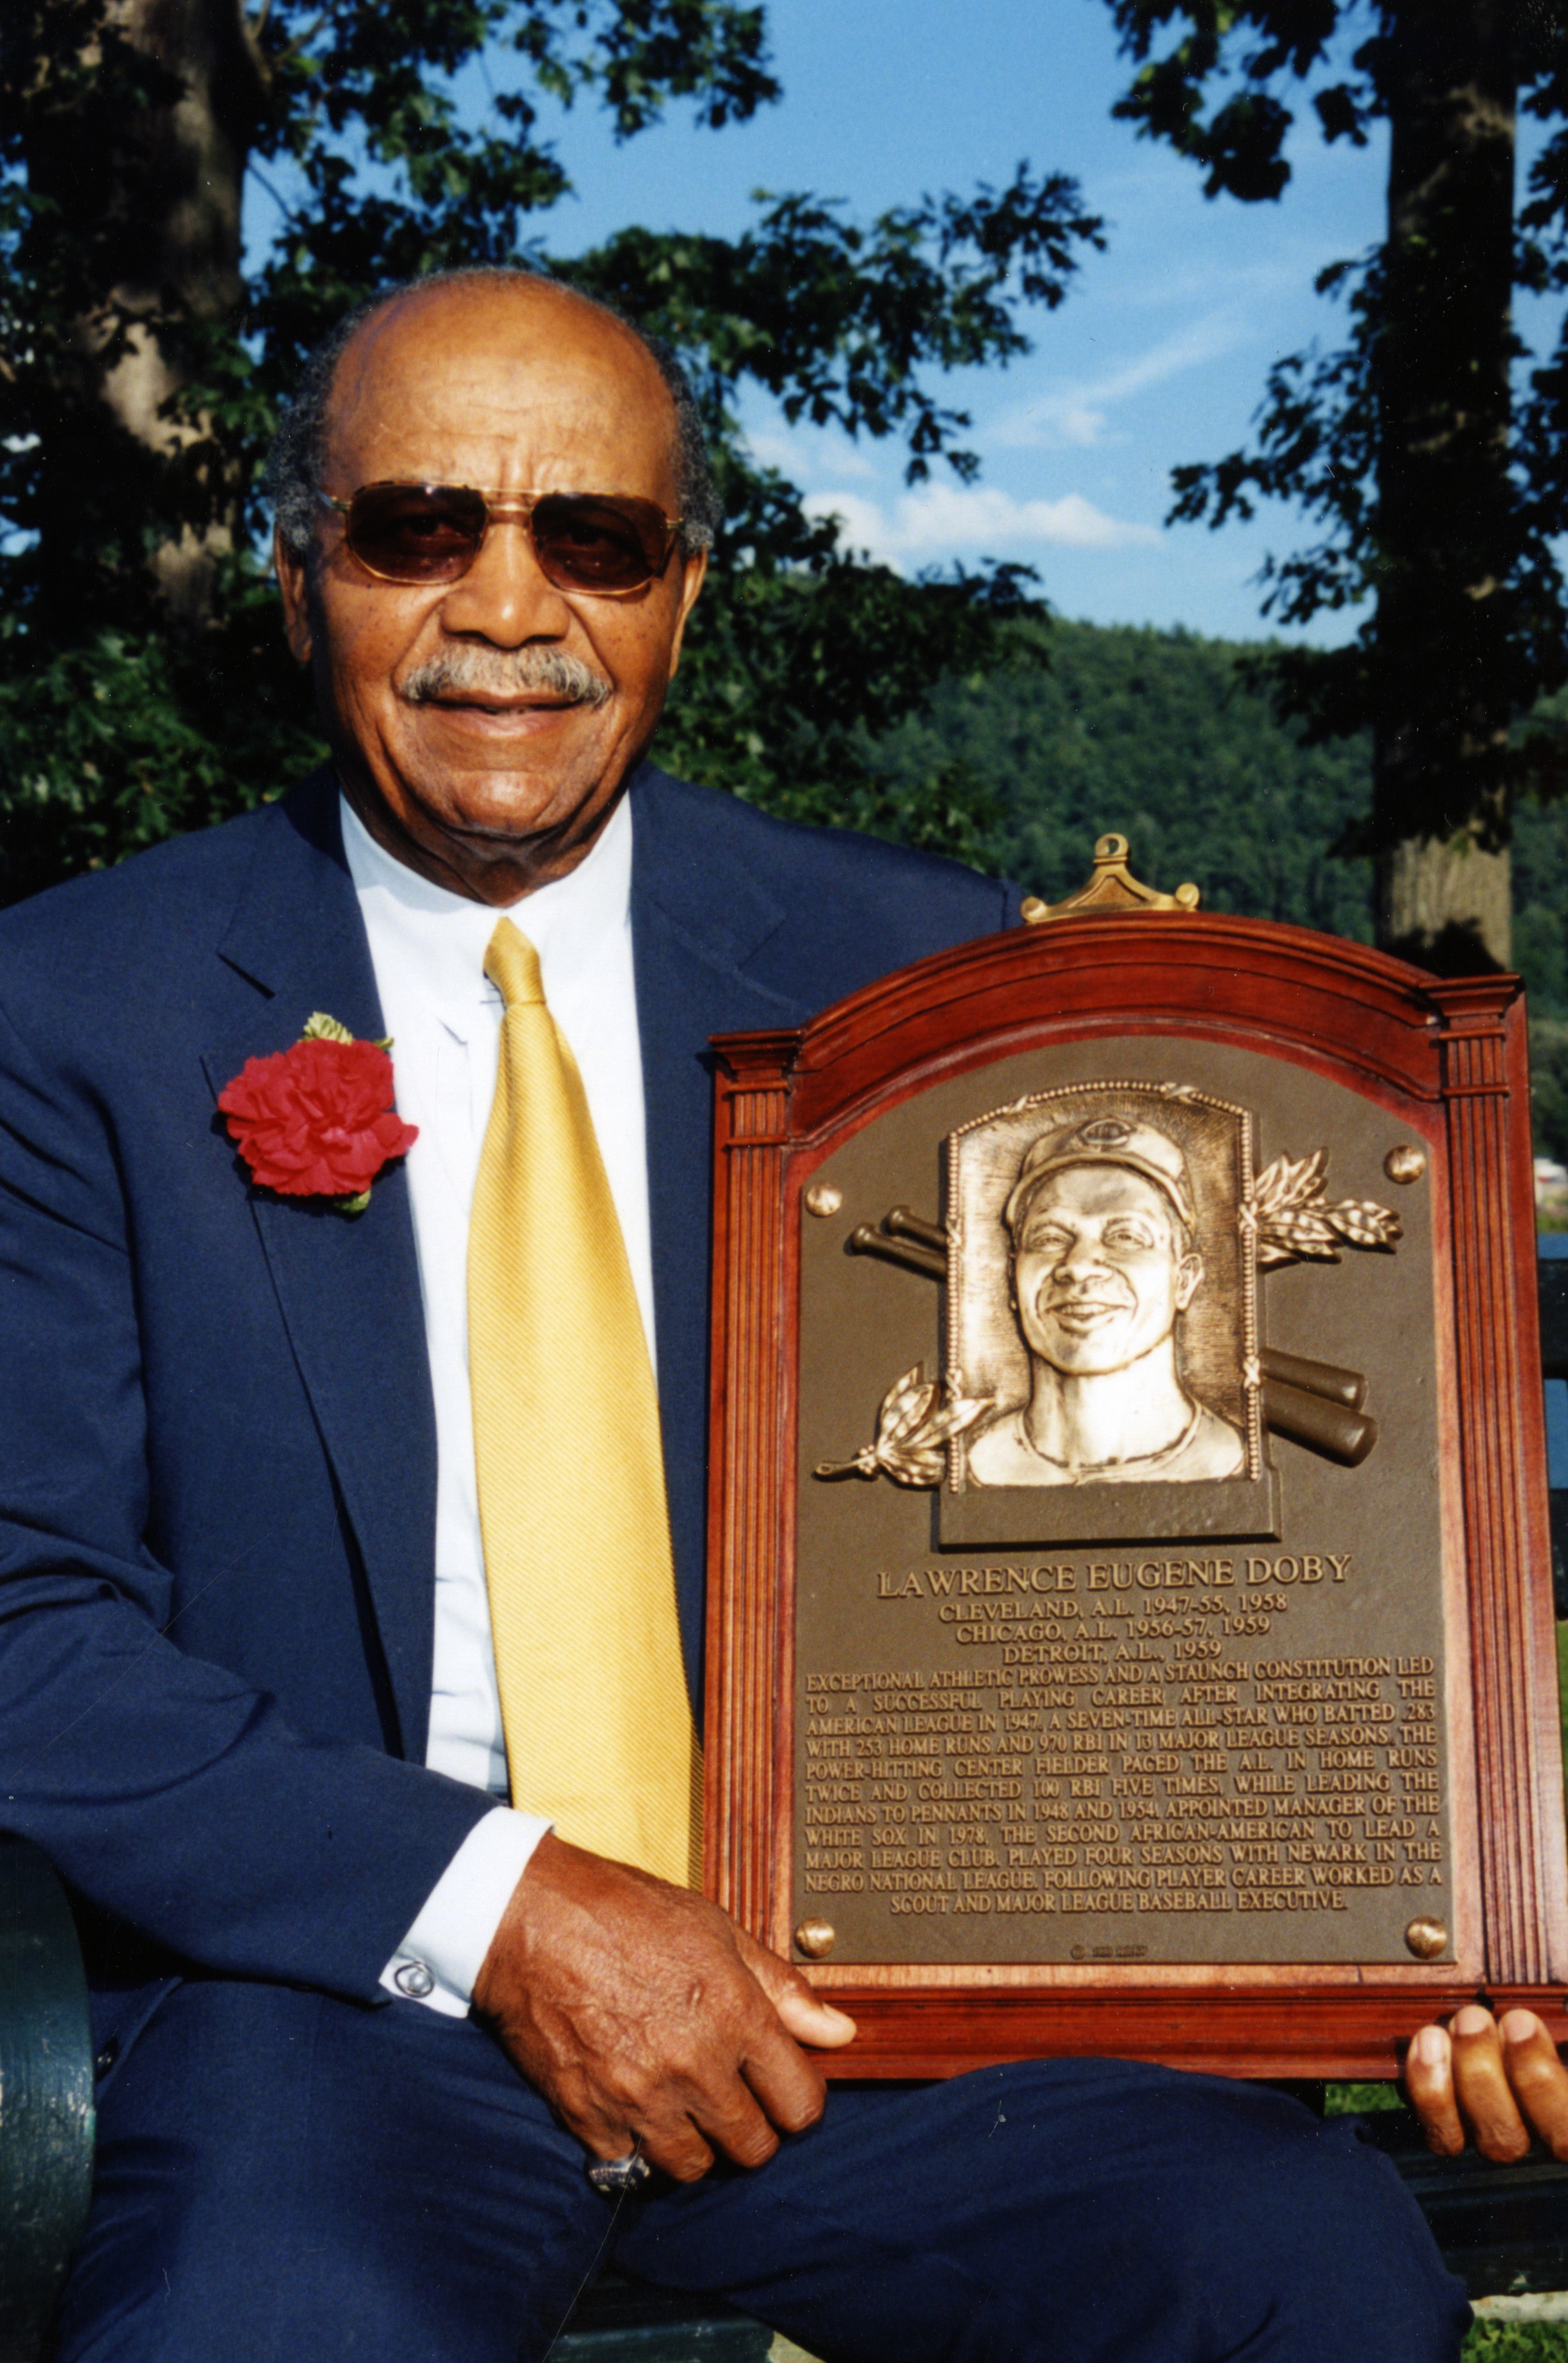 Doby's pioneering path earned Hall of Fame plaque